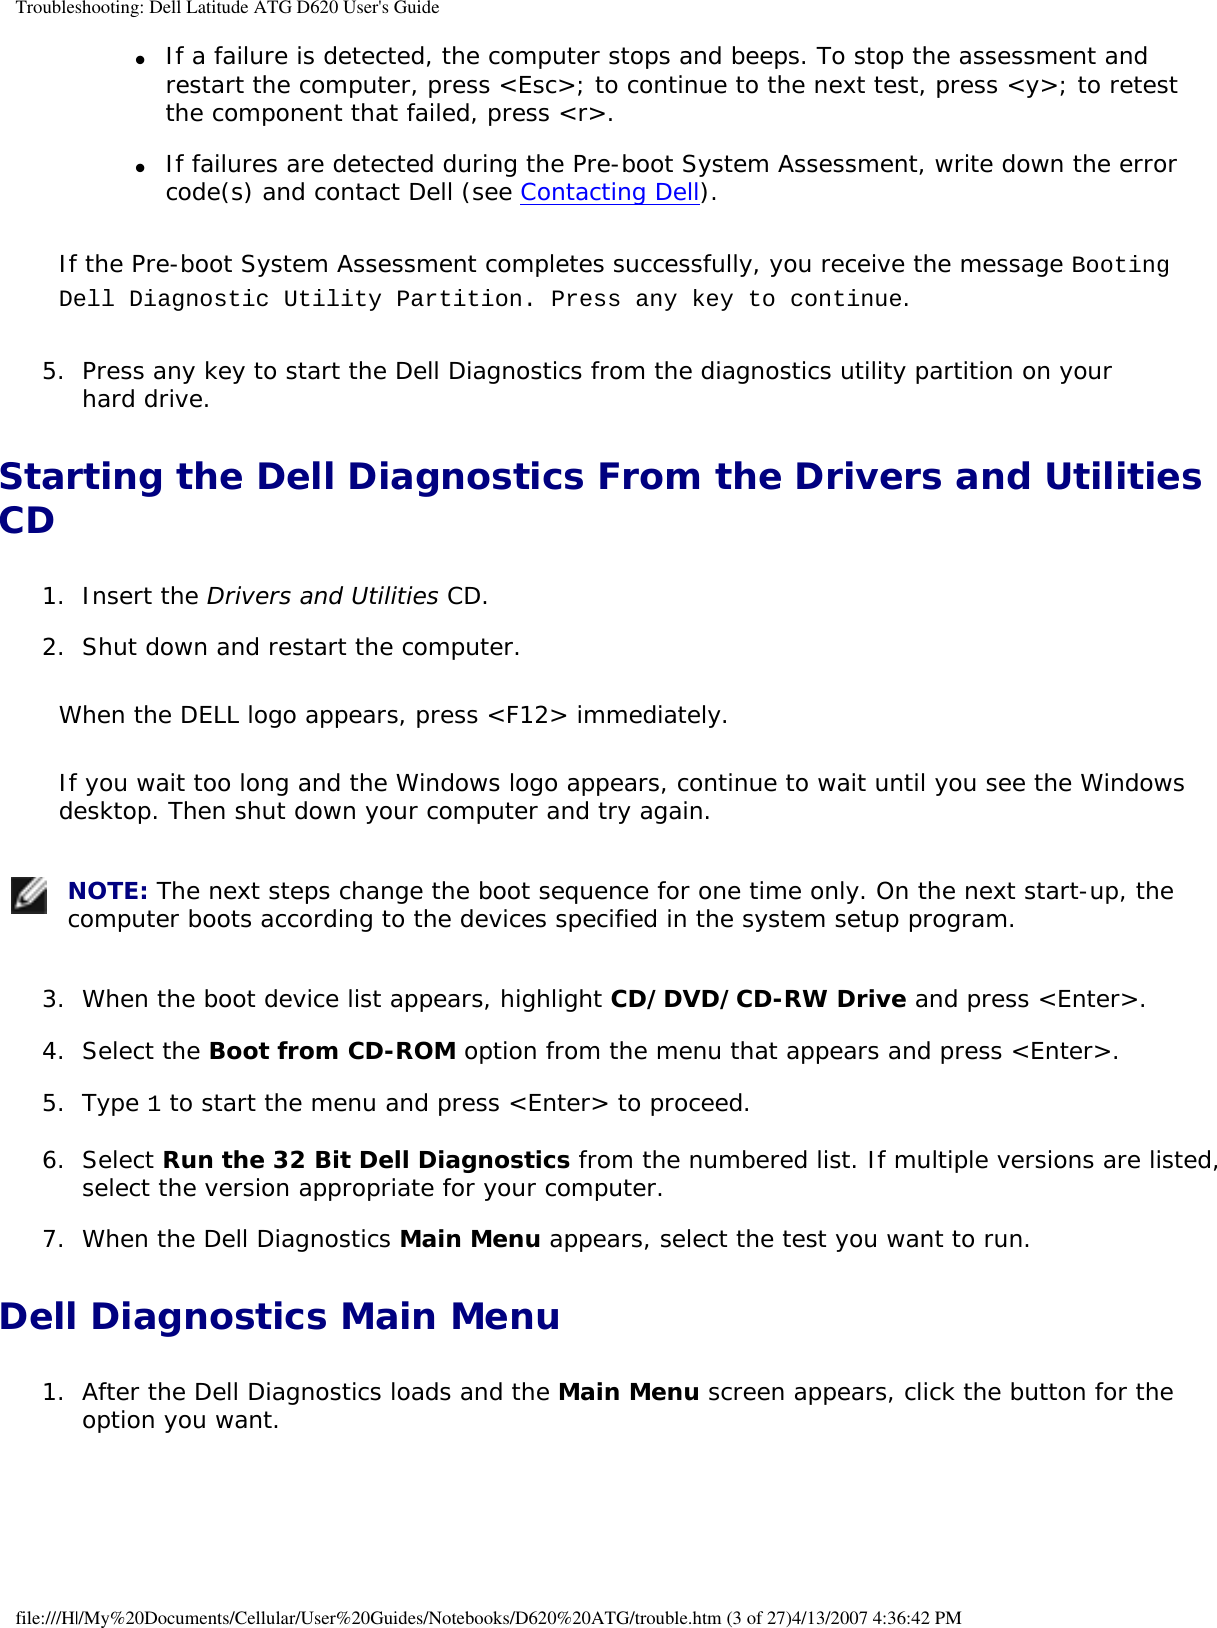 Troubleshooting: Dell Latitude ATG D620 User&apos;s Guide●     If a failure is detected, the computer stops and beeps. To stop the assessment and restart the computer, press &lt;Esc&gt;; to continue to the next test, press &lt;y&gt;; to retest the component that failed, press &lt;r&gt;.   ●     If failures are detected during the Pre-boot System Assessment, write down the error code(s) and contact Dell (see Contacting Dell).  If the Pre-boot System Assessment completes successfully, you receive the message Booting Dell Diagnostic Utility Partition. Press any key to continue.5.  Press any key to start the Dell Diagnostics from the diagnostics utility partition on your hard drive.   Starting the Dell Diagnostics From the Drivers and Utilities CD1.  Insert the Drivers and Utilities CD.   2.  Shut down and restart the computer.   When the DELL logo appears, press &lt;F12&gt; immediately.If you wait too long and the Windows logo appears, continue to wait until you see the Windows desktop. Then shut down your computer and try again. NOTE: The next steps change the boot sequence for one time only. On the next start-up, the computer boots according to the devices specified in the system setup program.3.  When the boot device list appears, highlight CD/DVD/CD-RW Drive and press &lt;Enter&gt;.   4.  Select the Boot from CD-ROM option from the menu that appears and press &lt;Enter&gt;.   5.  Type 1 to start the menu and press &lt;Enter&gt; to proceed.   6.  Select Run the 32 Bit Dell Diagnostics from the numbered list. If multiple versions are listed, select the version appropriate for your computer.   7.  When the Dell Diagnostics Main Menu appears, select the test you want to run.   Dell Diagnostics Main Menu1.  After the Dell Diagnostics loads and the Main Menu screen appears, click the button for the option you want.   file:///H|/My%20Documents/Cellular/User%20Guides/Notebooks/D620%20ATG/trouble.htm (3 of 27)4/13/2007 4:36:42 PM